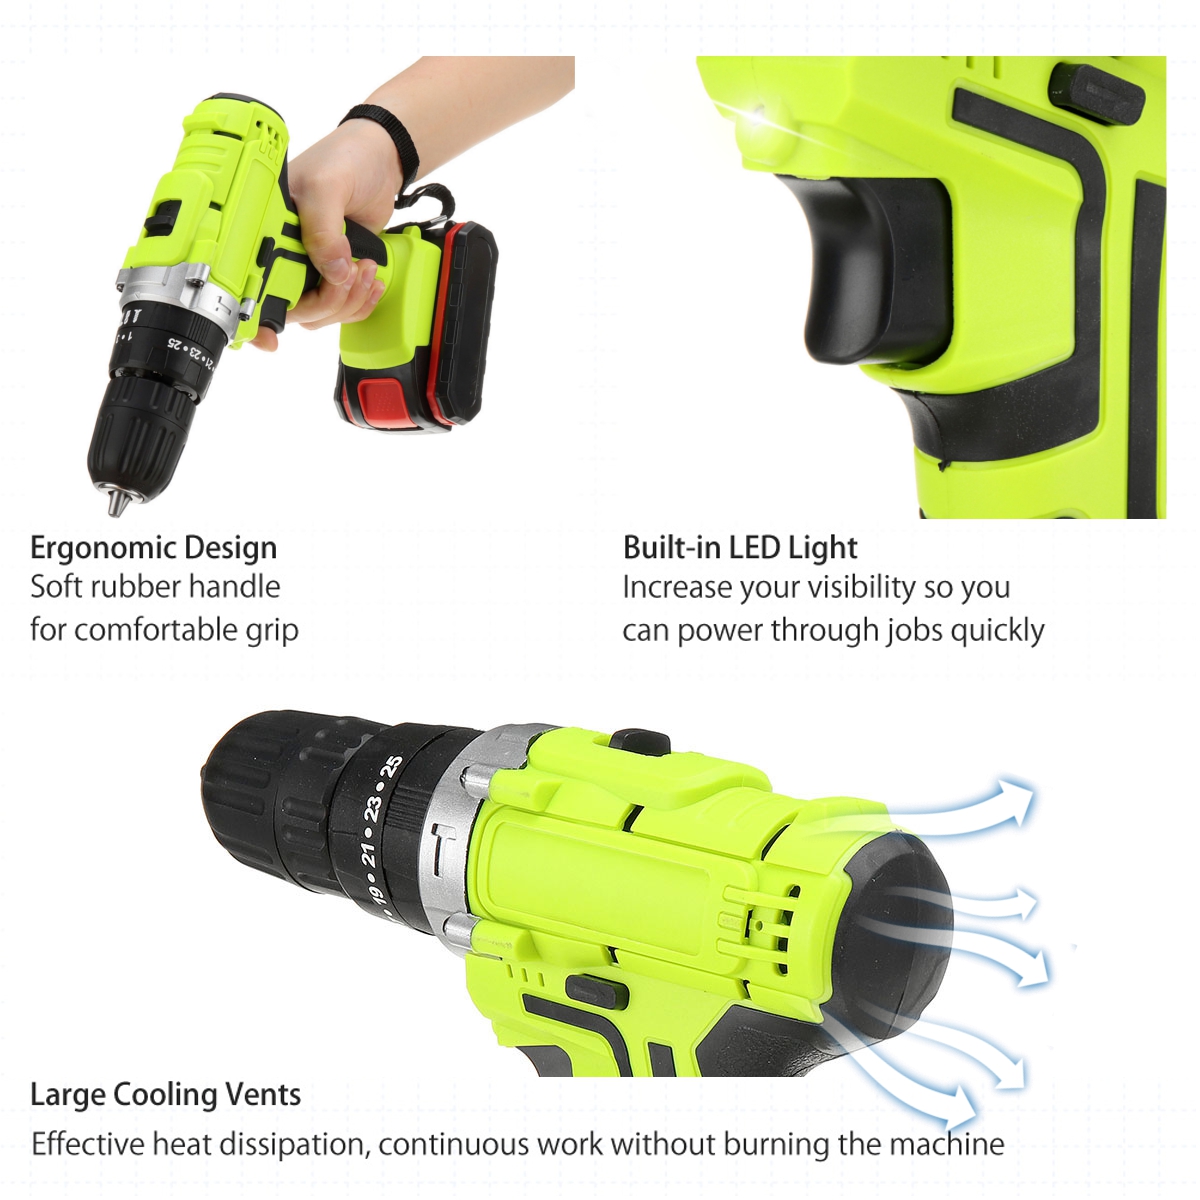 48VF-22800mAh-Cordless-Rechargable-3-In-1-Power-Drills-Impact-Electric-Drill-Driver-With-1Pcs-Batter-1877434-7